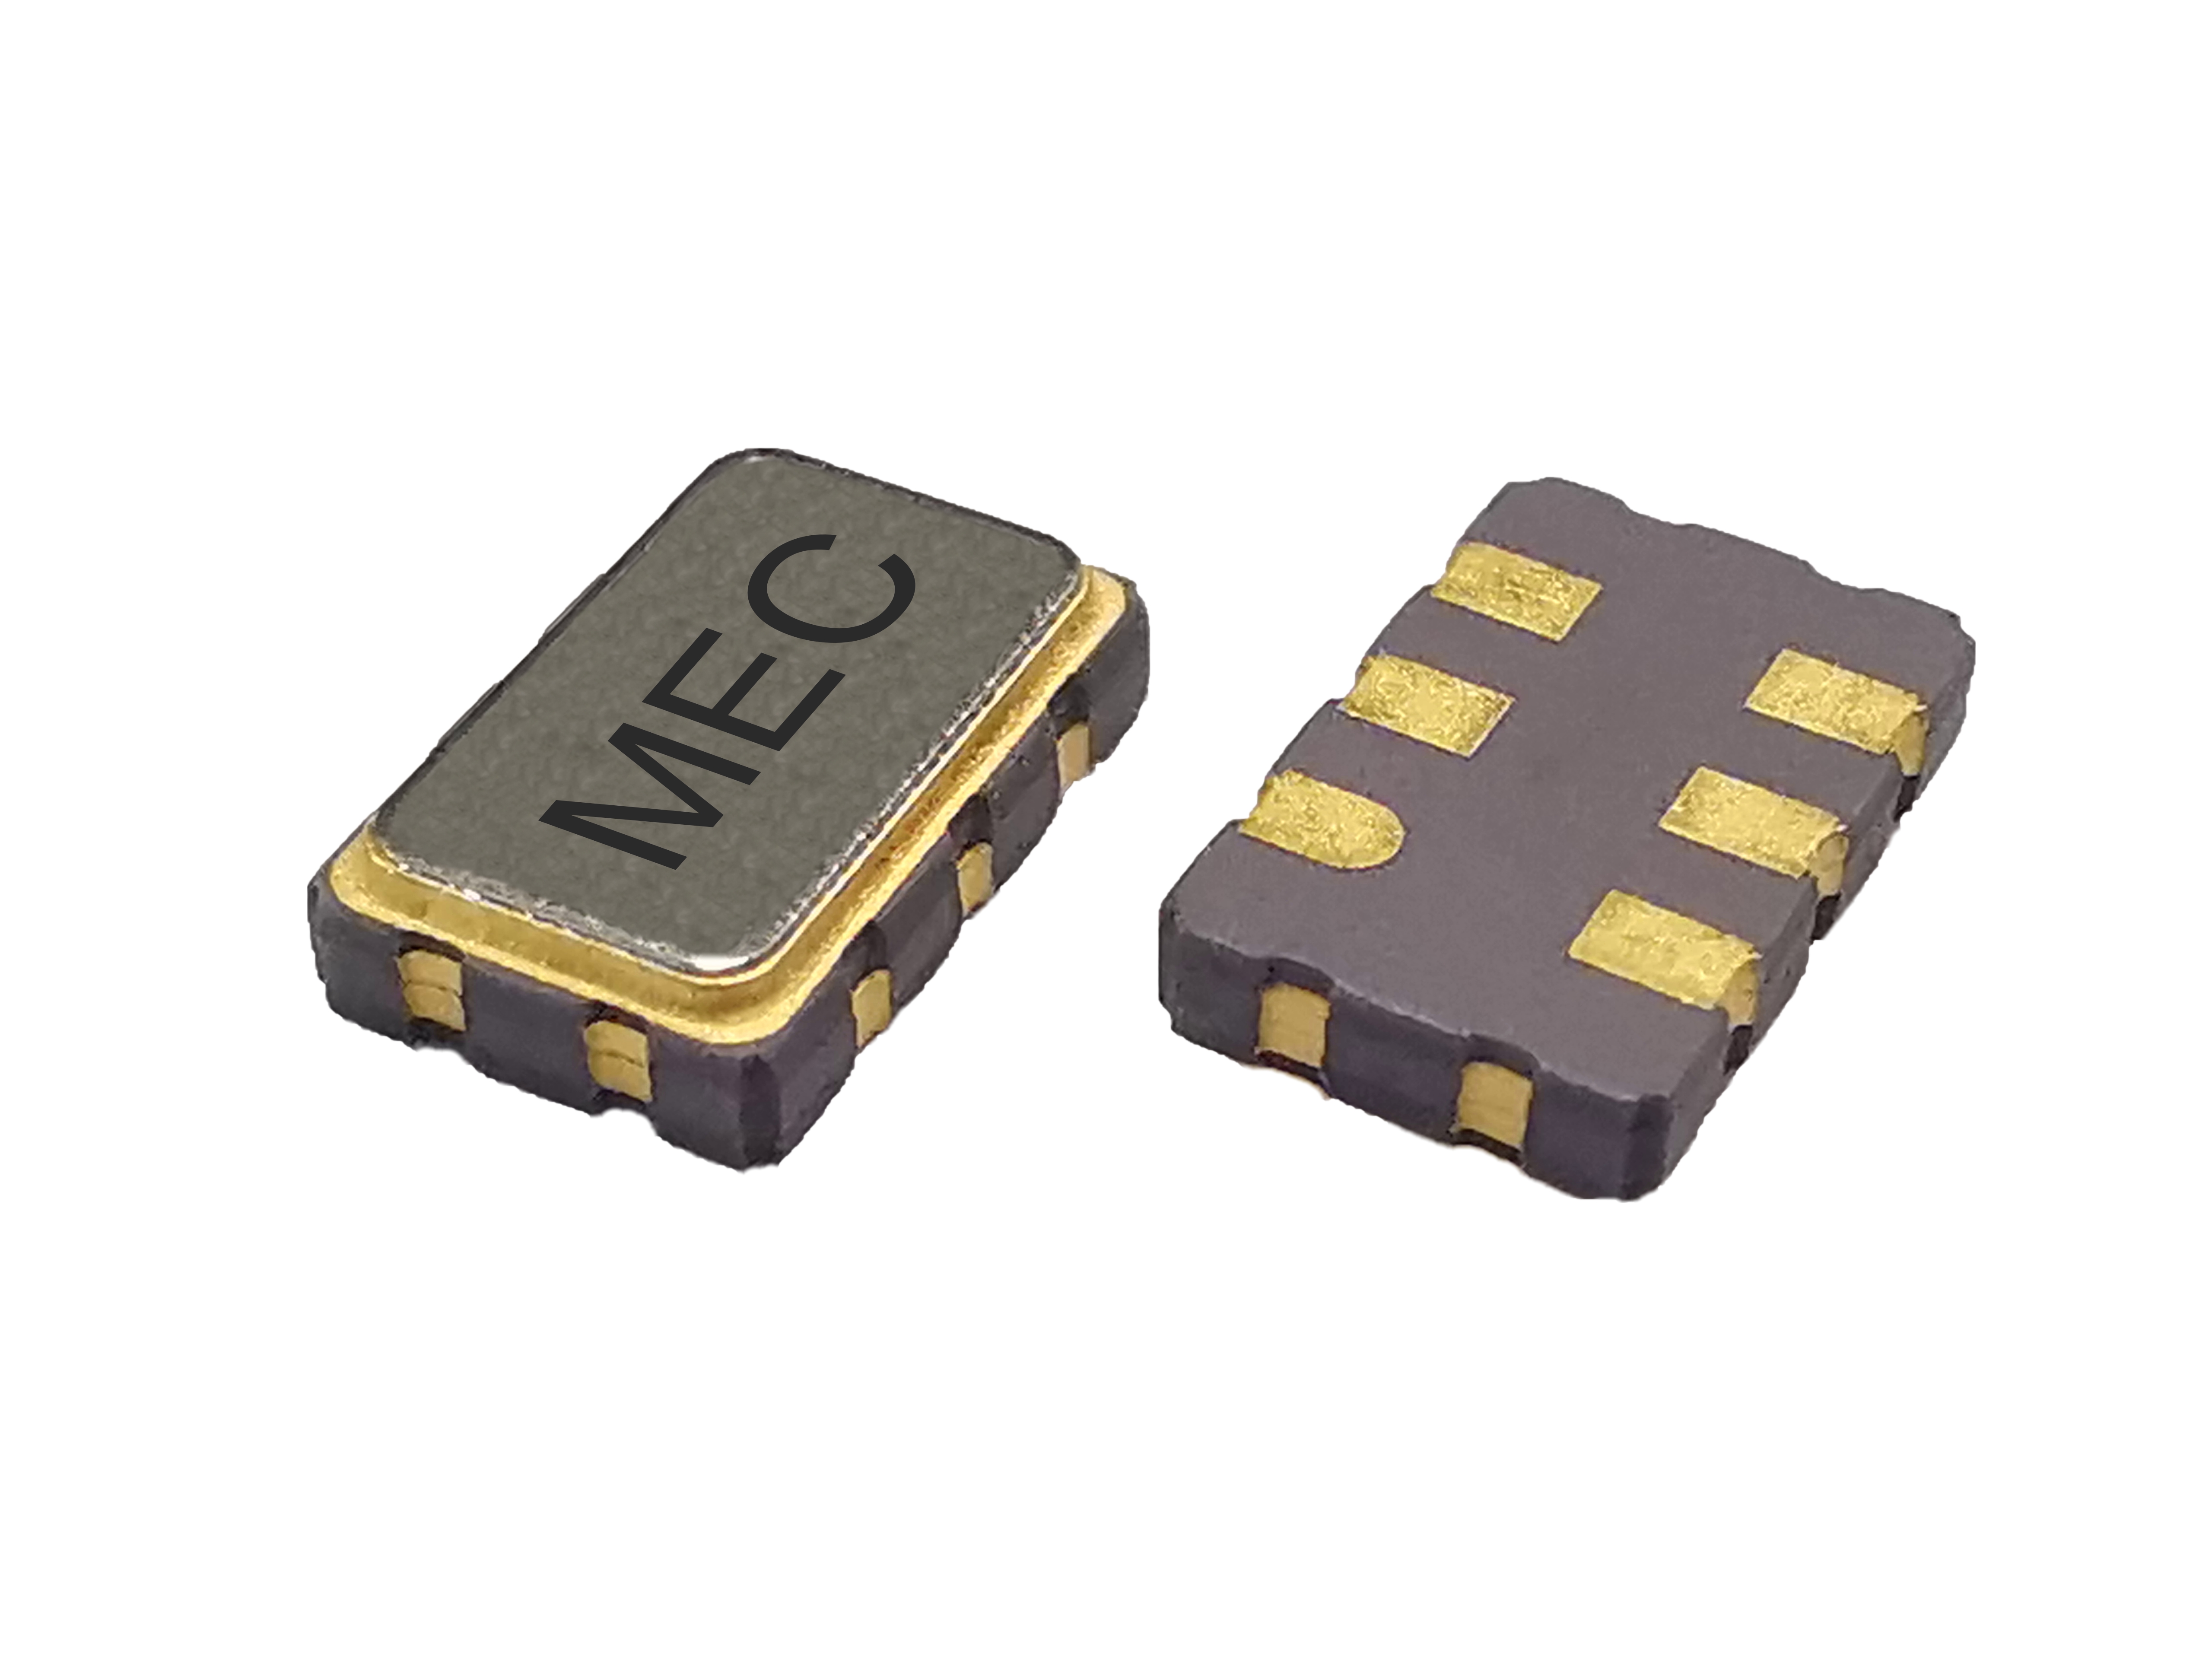 HPQN536 5032 2.5V Low Jitter Differential LVPECL SMD Crystal Oscillator